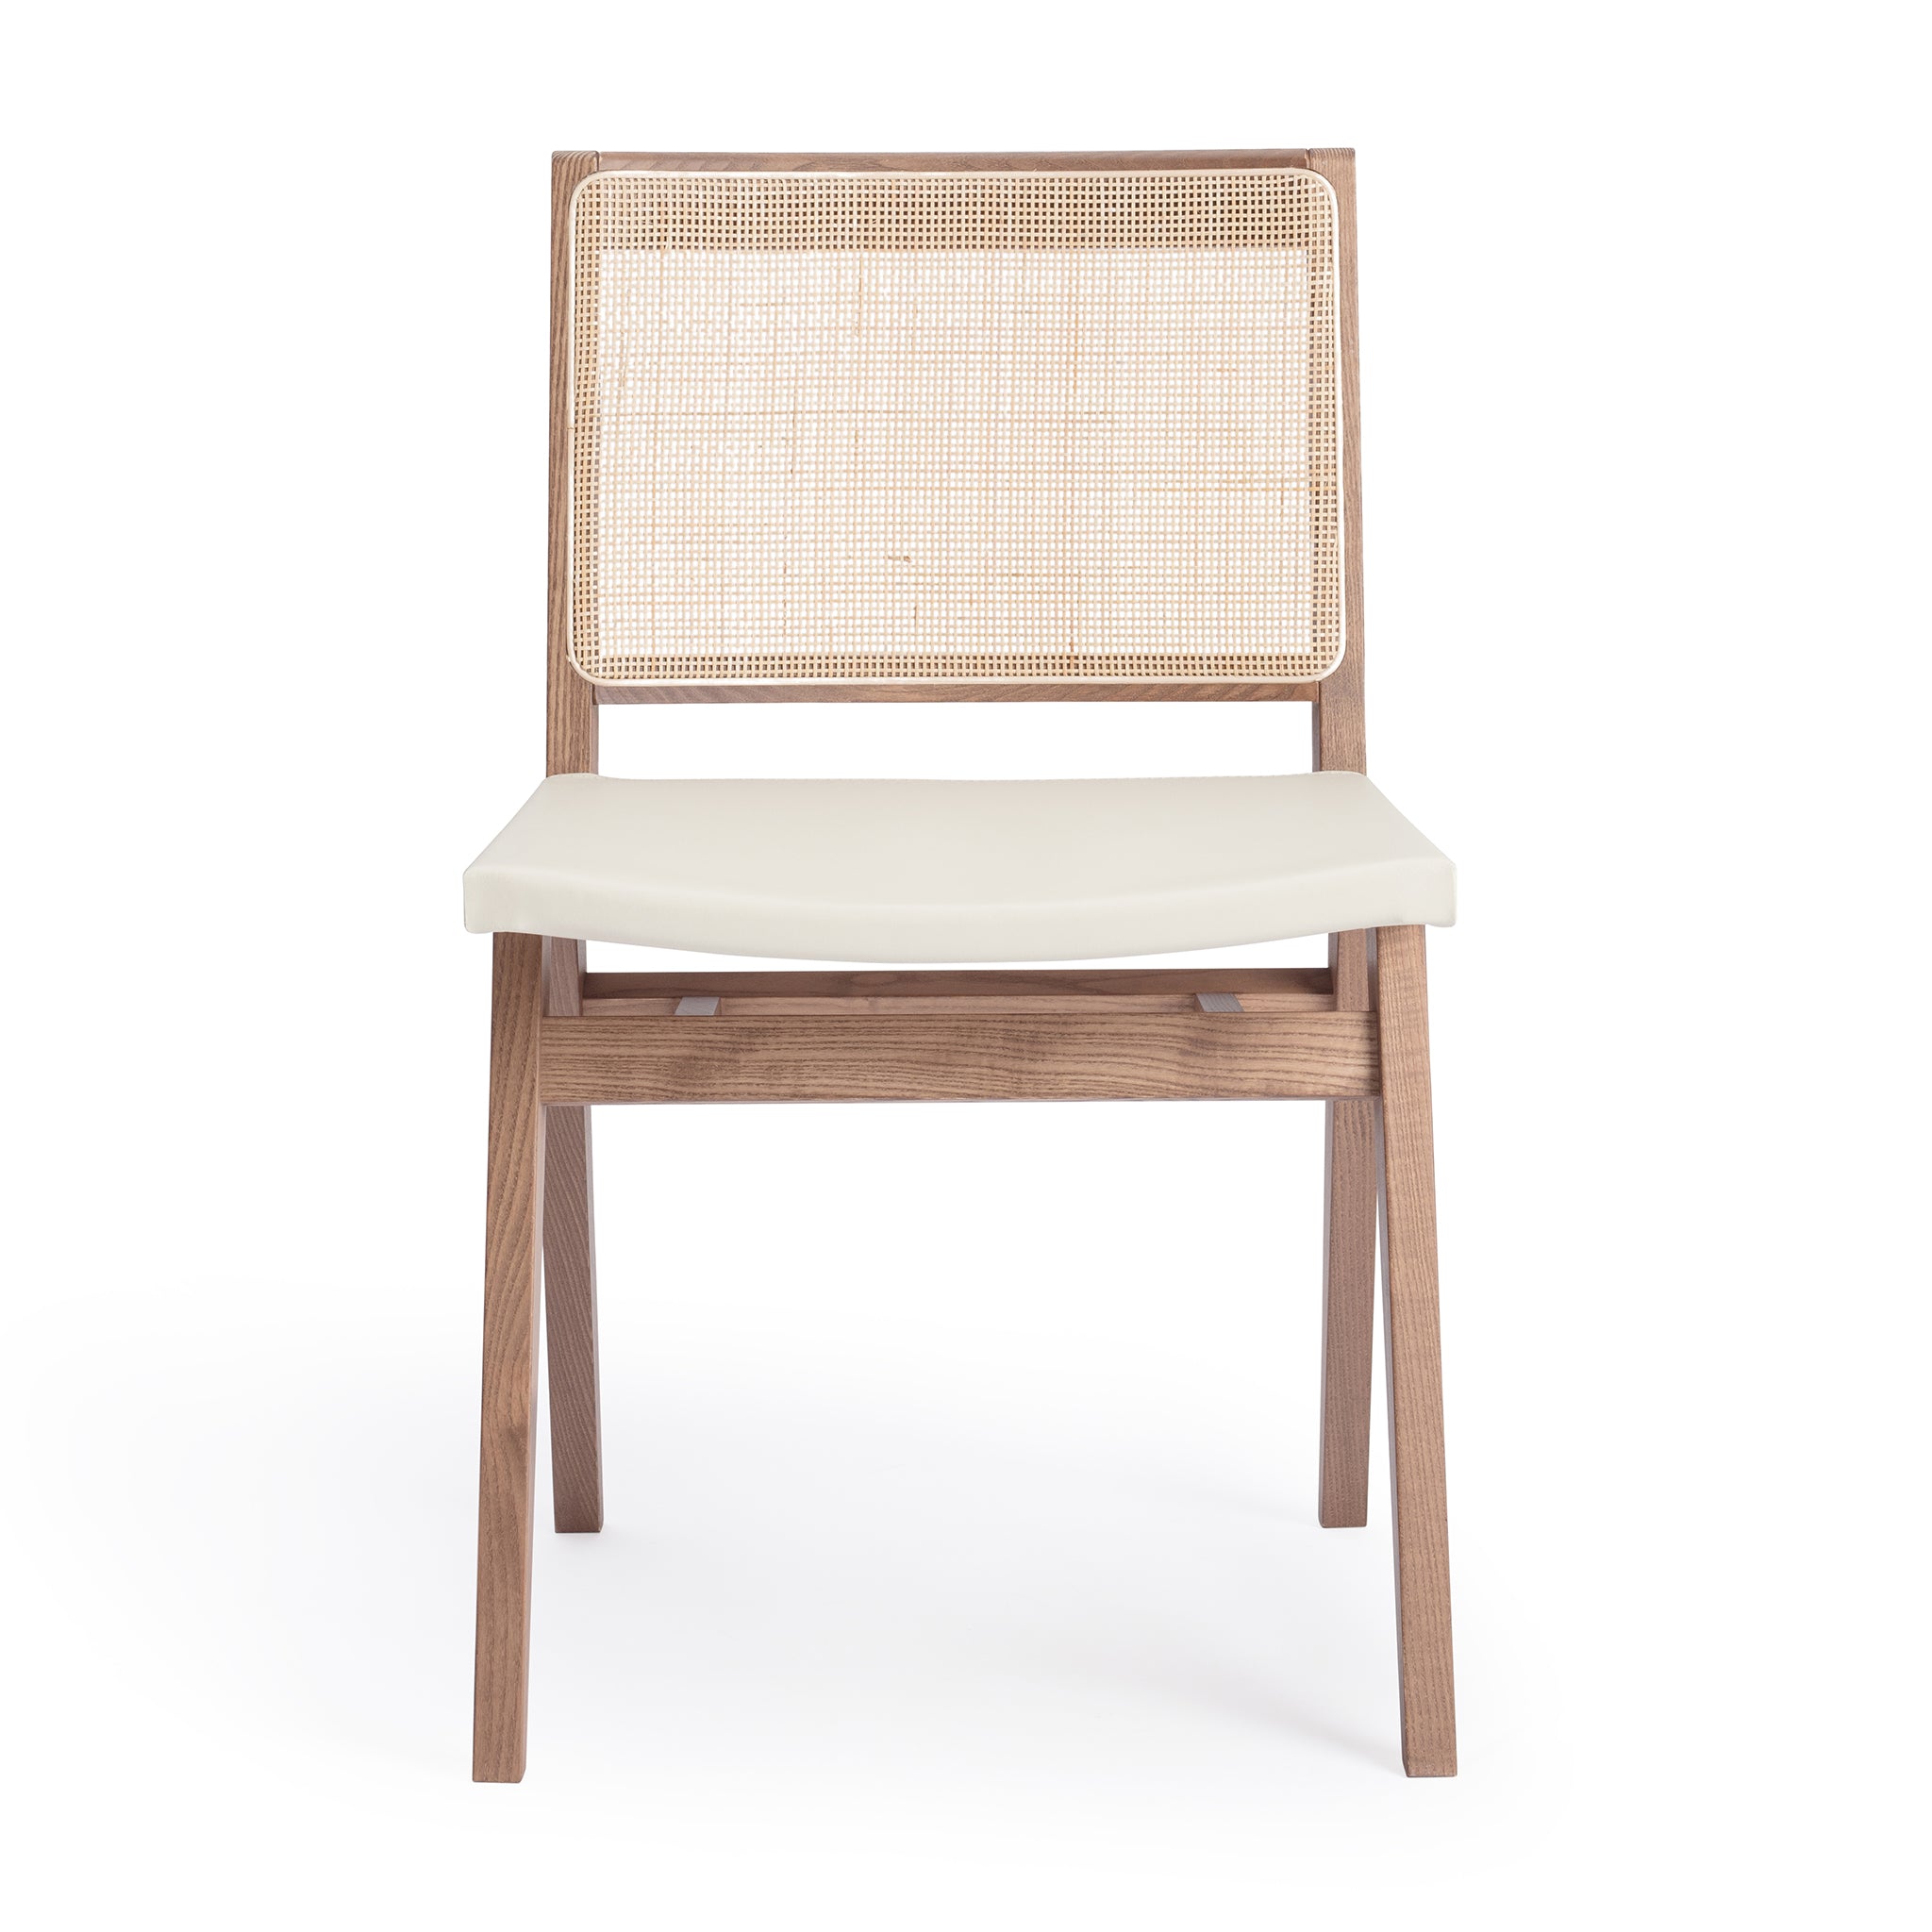 Front view of an "Elye" modern dining chair, walnut stained ash frame, square weave cane back, contract grade off white leather seat, produced by Klarel in Italy. #K41-1